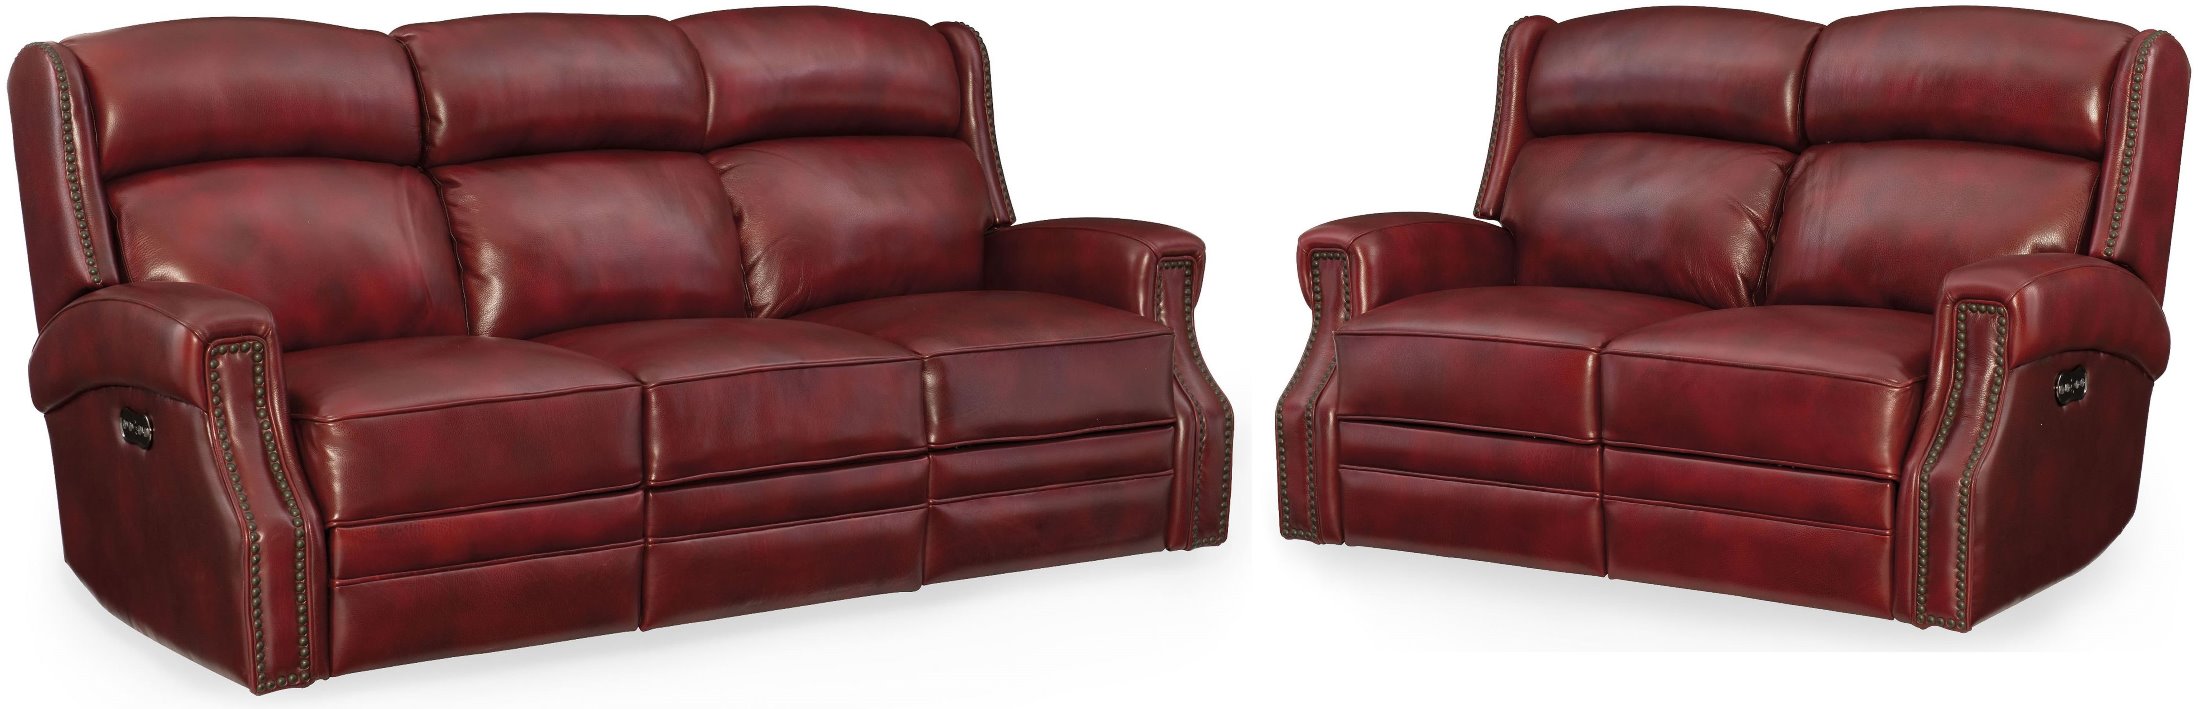 Carlisle Red Leather Power Reclining, Red Leather Sofa And Chair Set